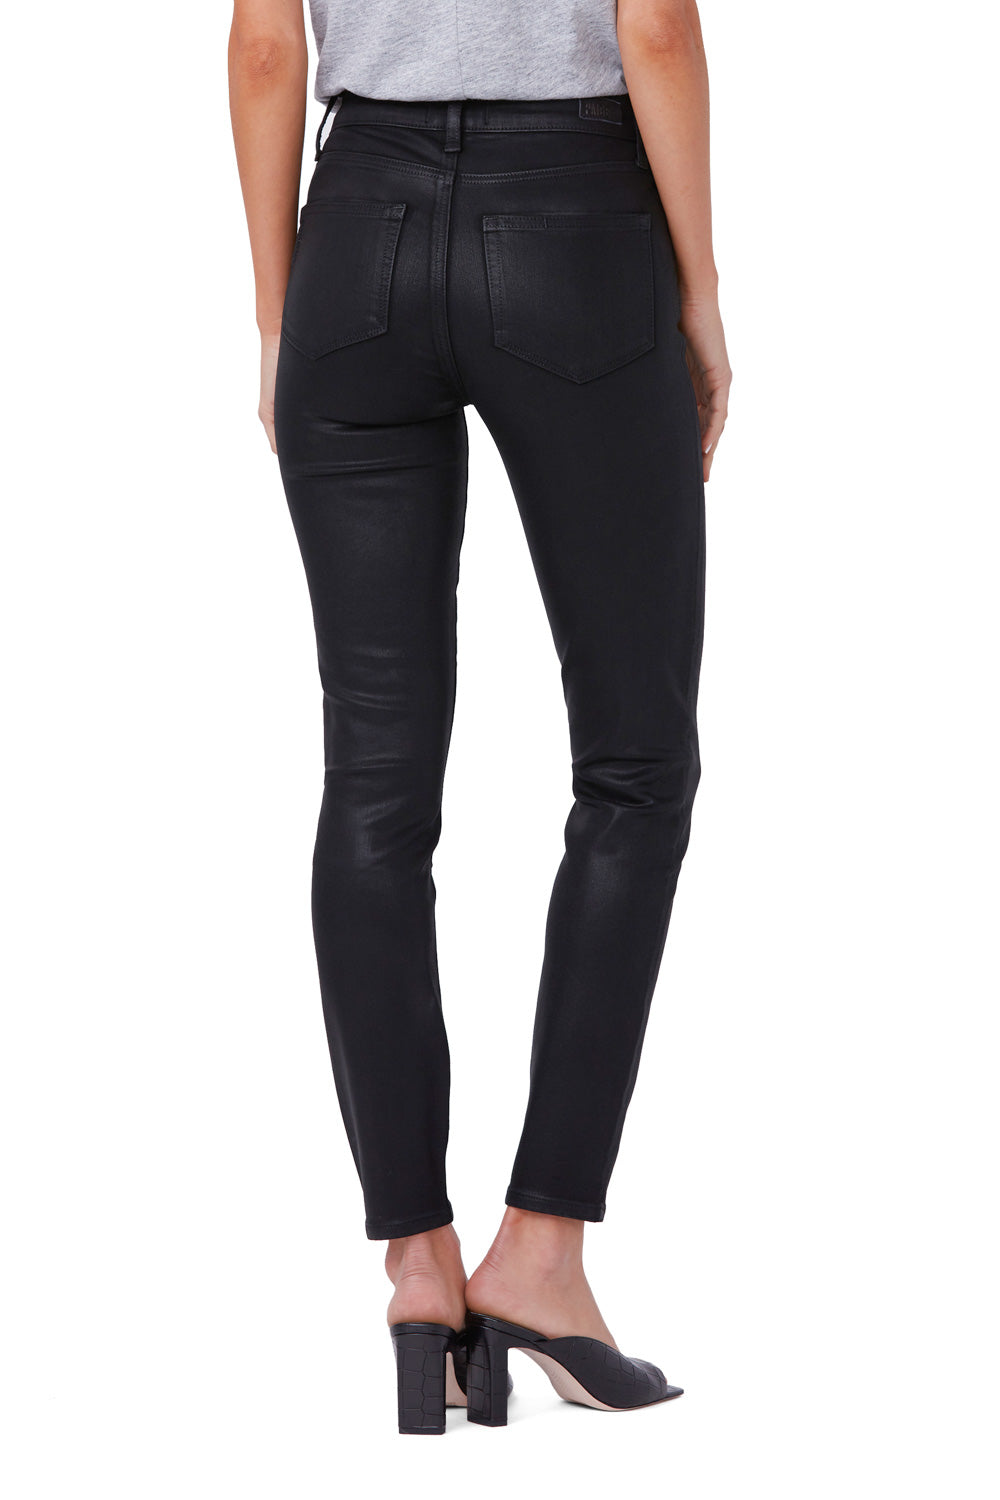 HOXTON ANKLE BLACK FOG LUXE JEANS